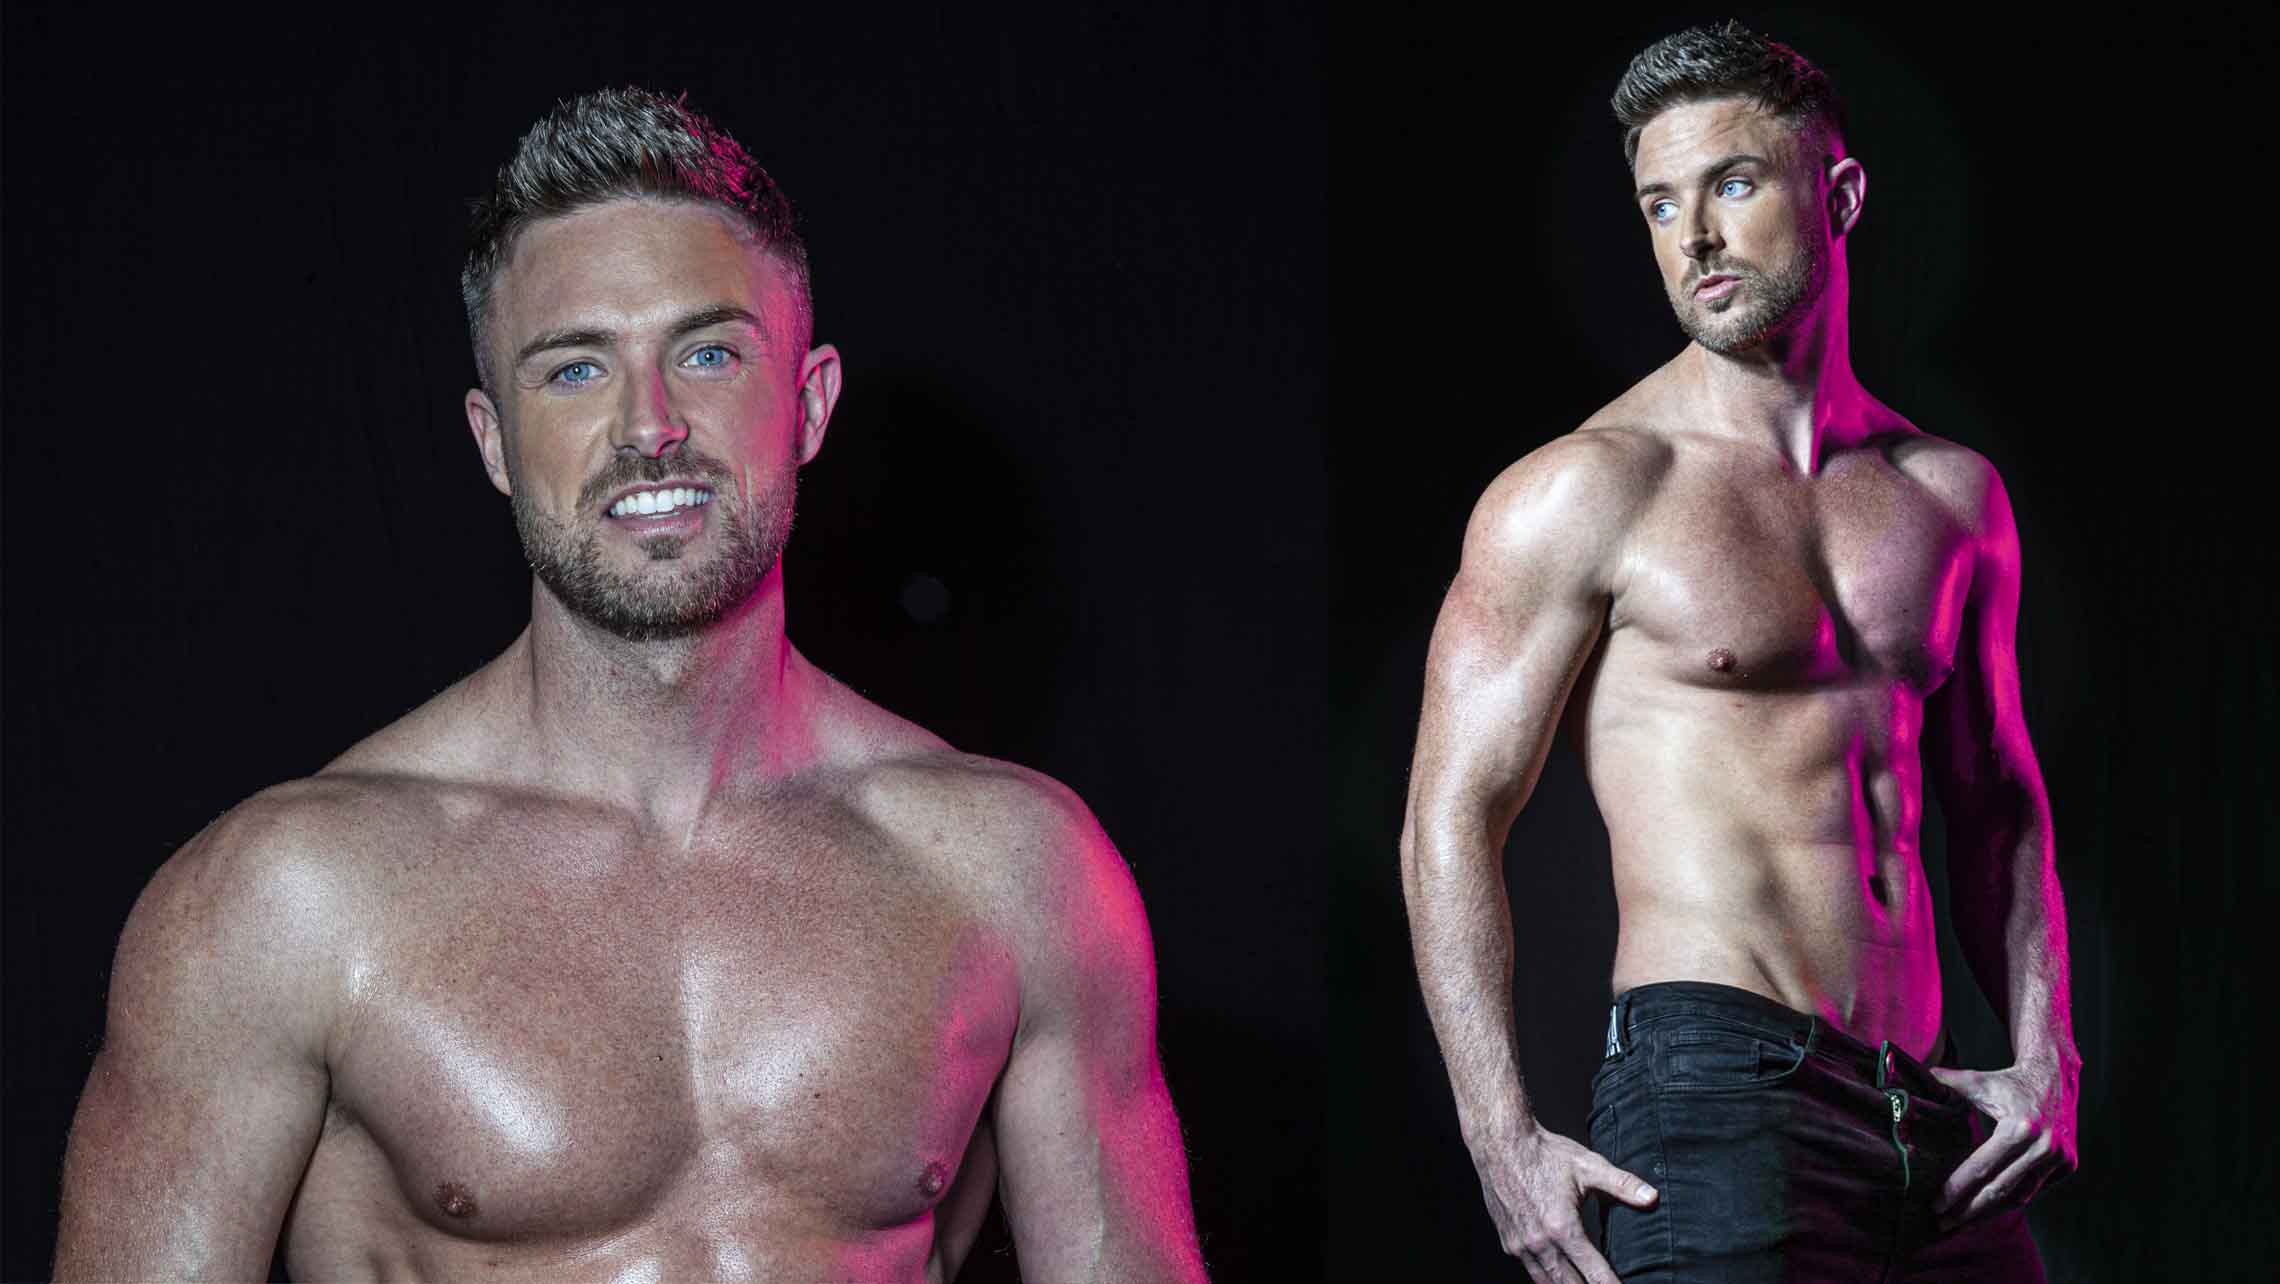 Male Strippers | Who is Celebs Go Dating star and Dreamboy Shane Finlayson?